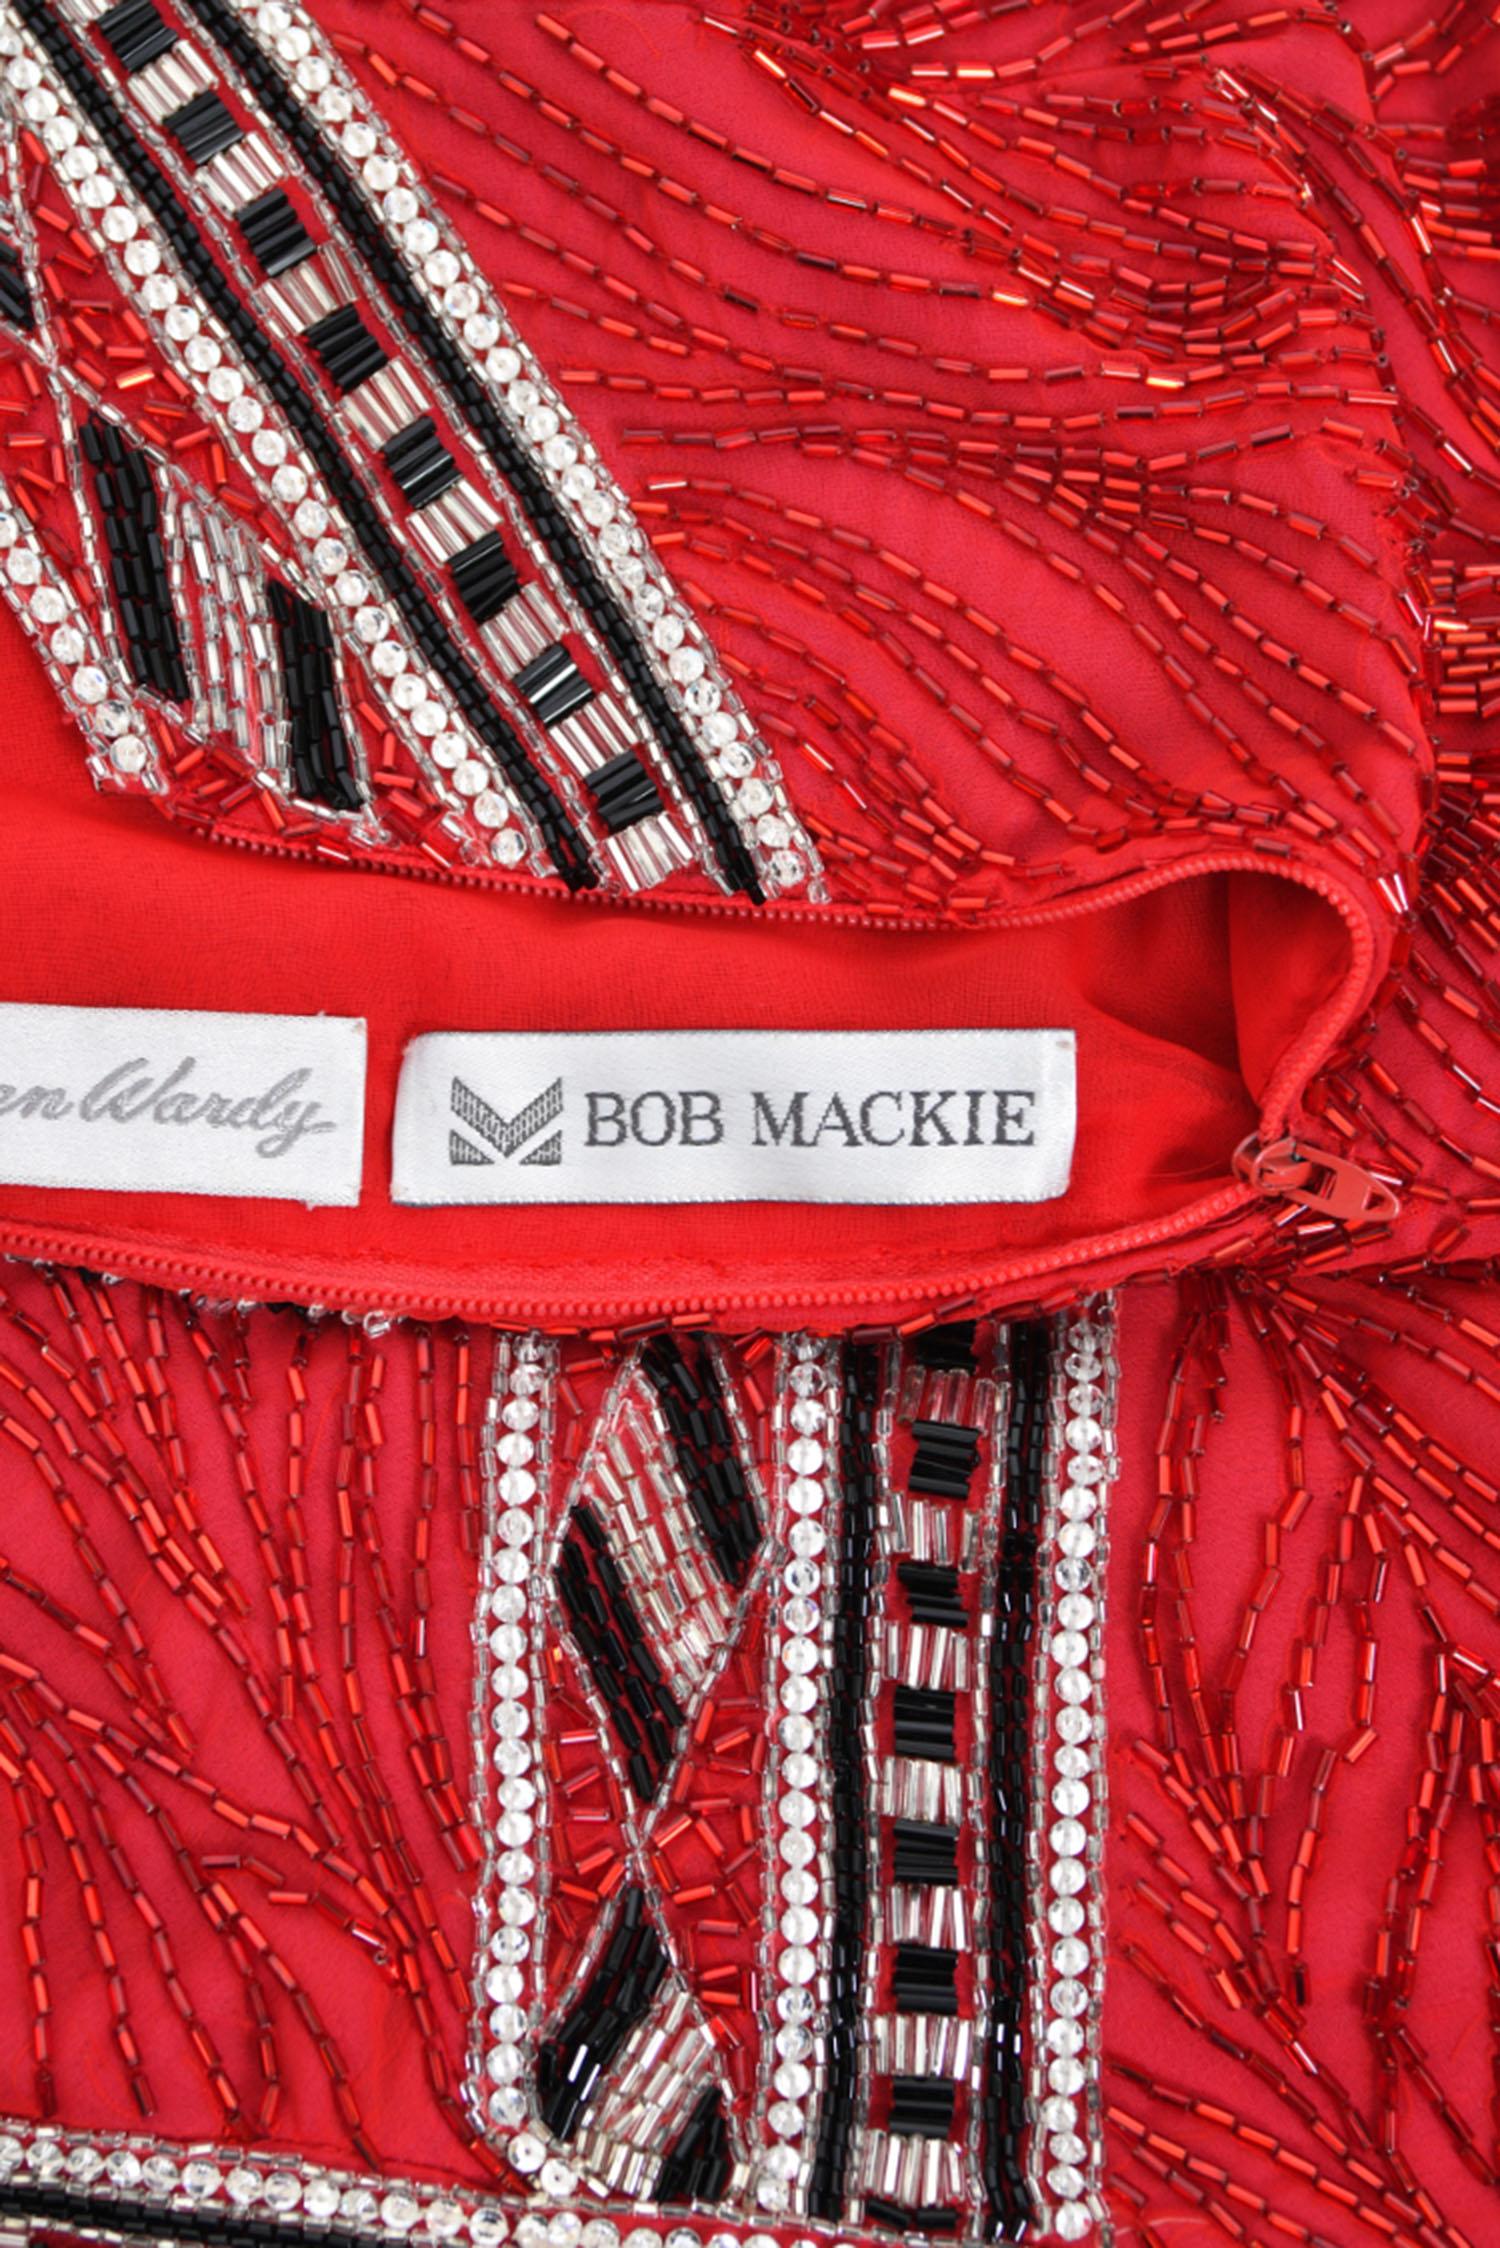 1984 Bob Mackie Documented Runway Fully Beaded Red Silk High-Low Mini Dress     For Sale 16